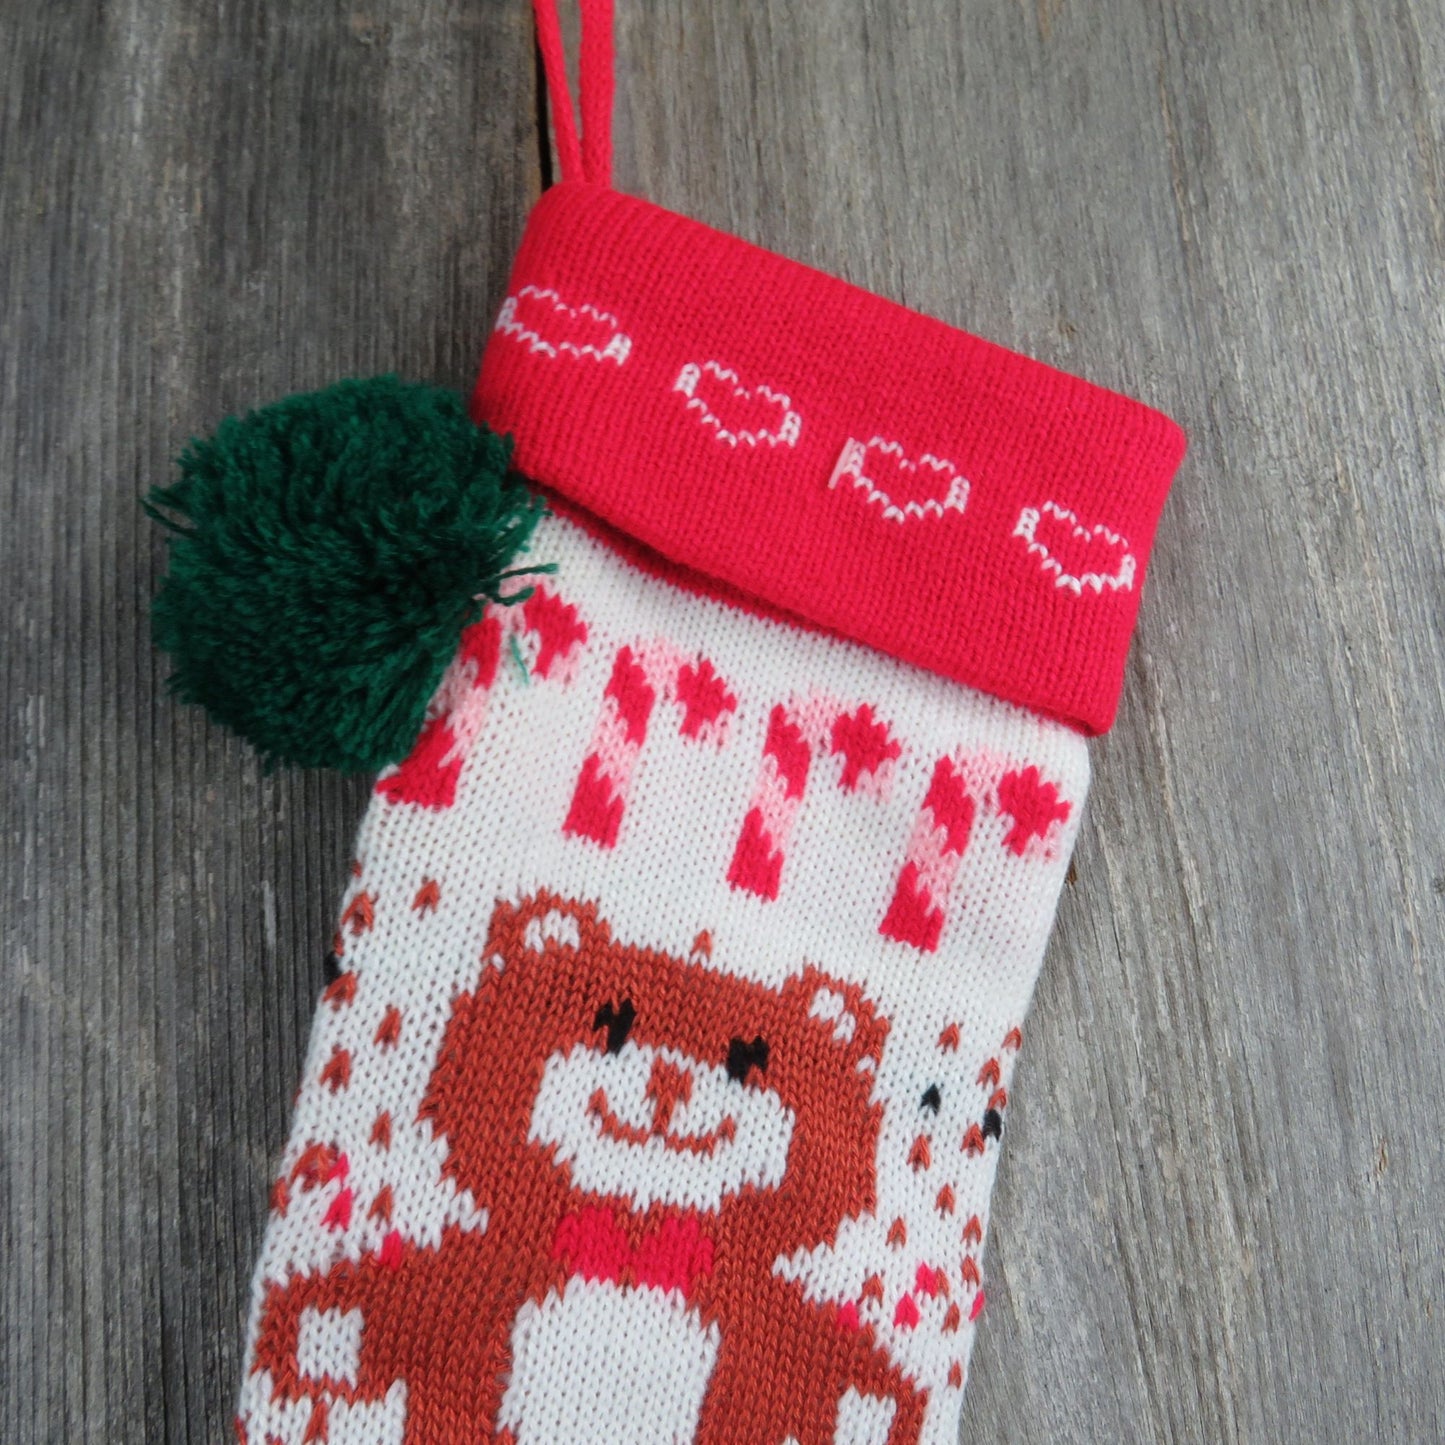 Vintage Teddy Bear Candy Cane Knit Christmas Stocking Red Green 1980s st13